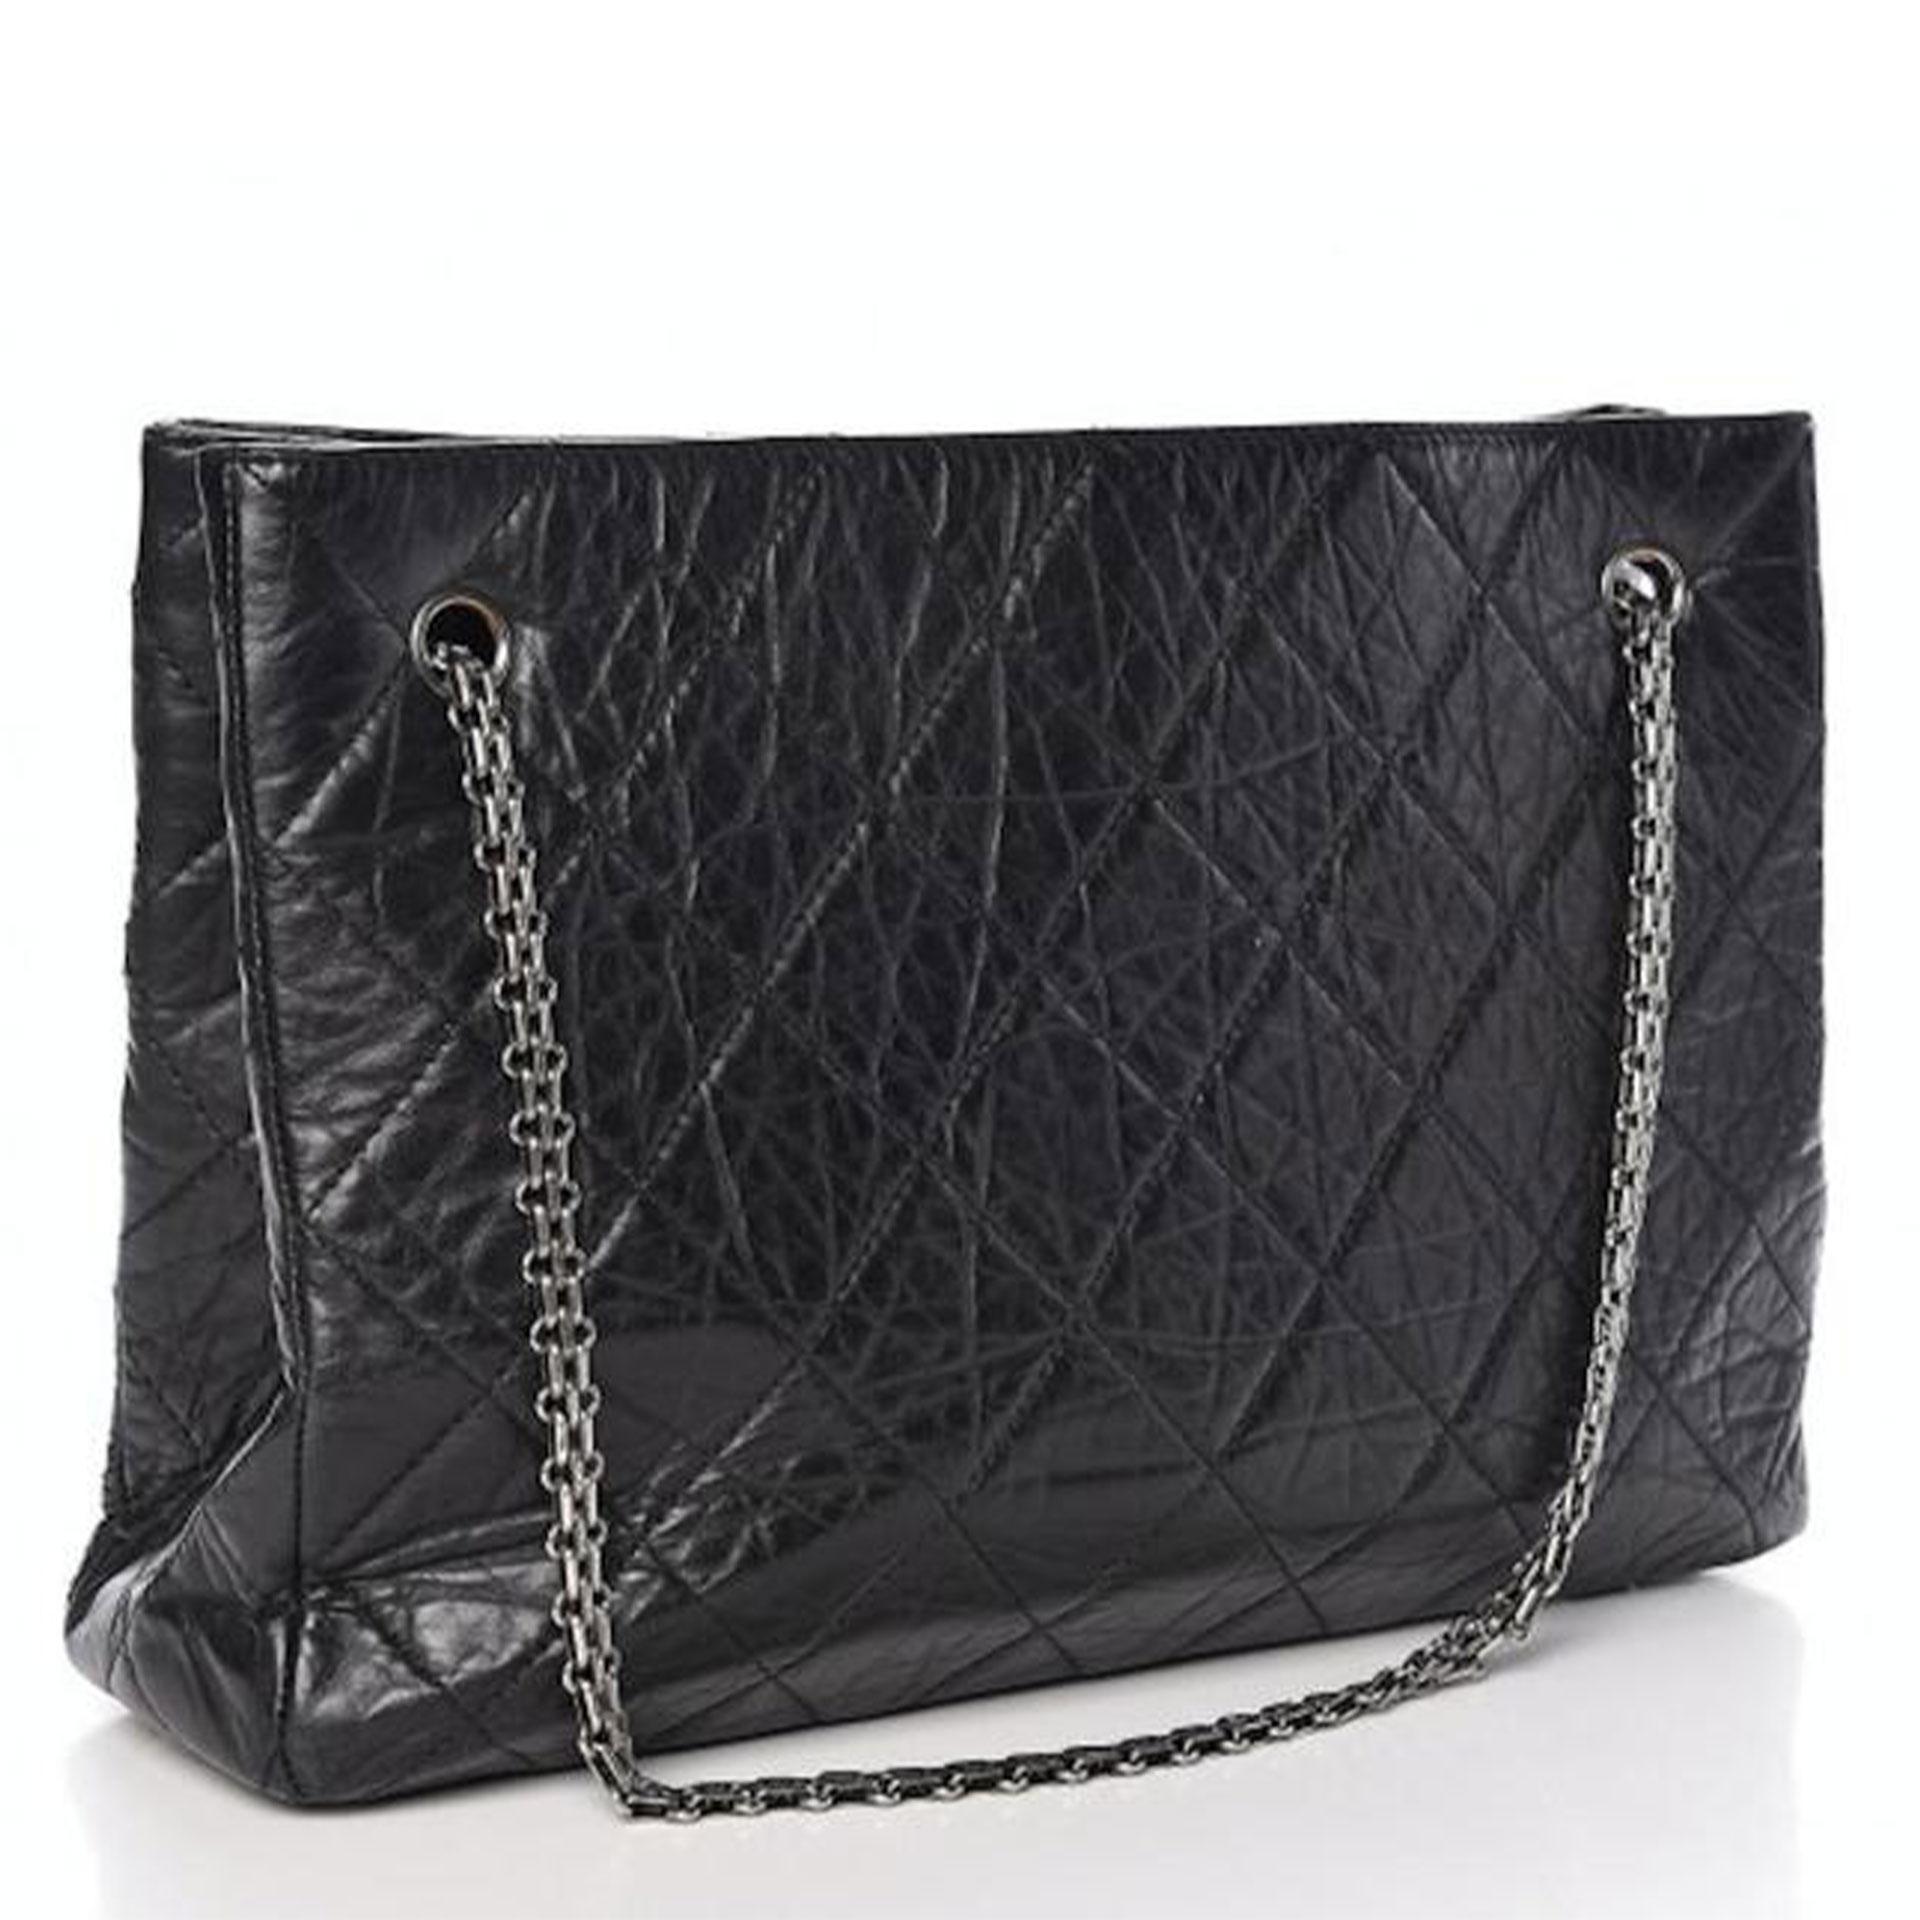 Chanel Reissue 2.55 Computer Laptop Work Business Classic Tote Bag 

Aged silver-tone hardware accents
Quilted diamond stitch aged calfskin leather
Chanel's signature reissue chain straps
Decorative mademoiselle turn-lock 
Magnetic snap closure 
Red